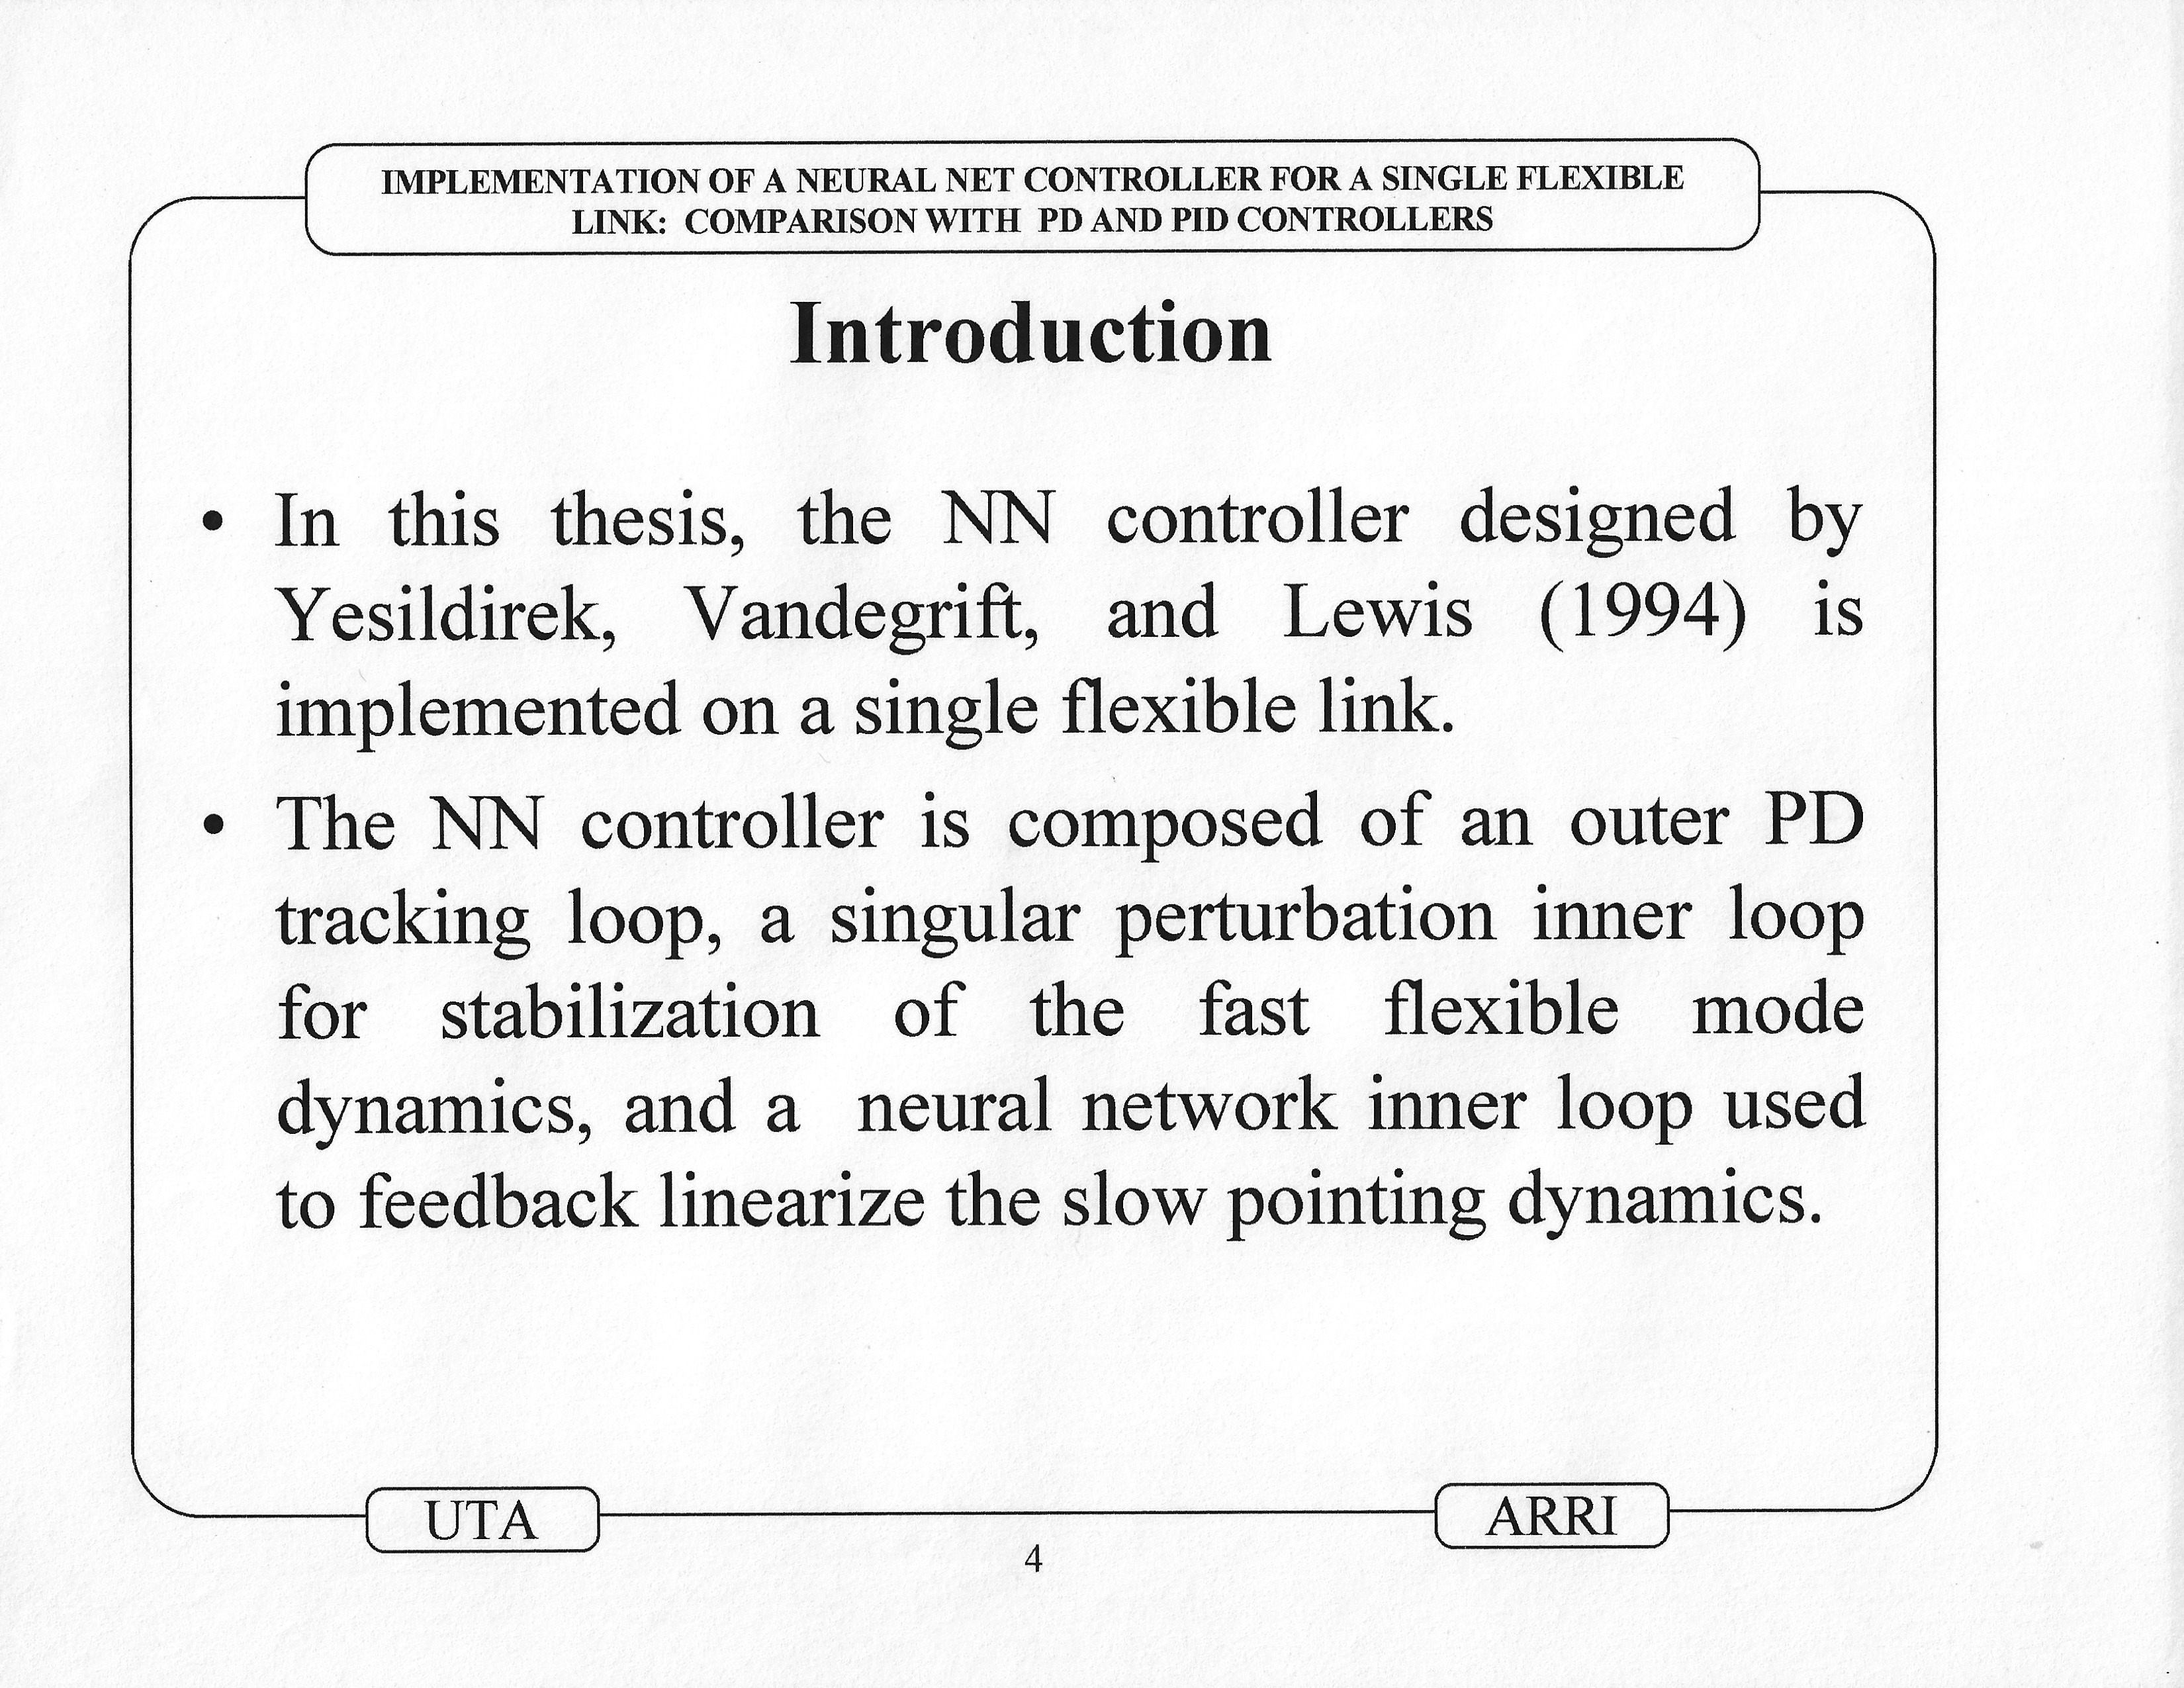 960724_Gutierrez_1996_Implementation_of_a_Neural_Net_Tracking_Controller_for_a_Single_Flexible_Link_Comparison_with_PD_and_PID_controllers_presentation_03